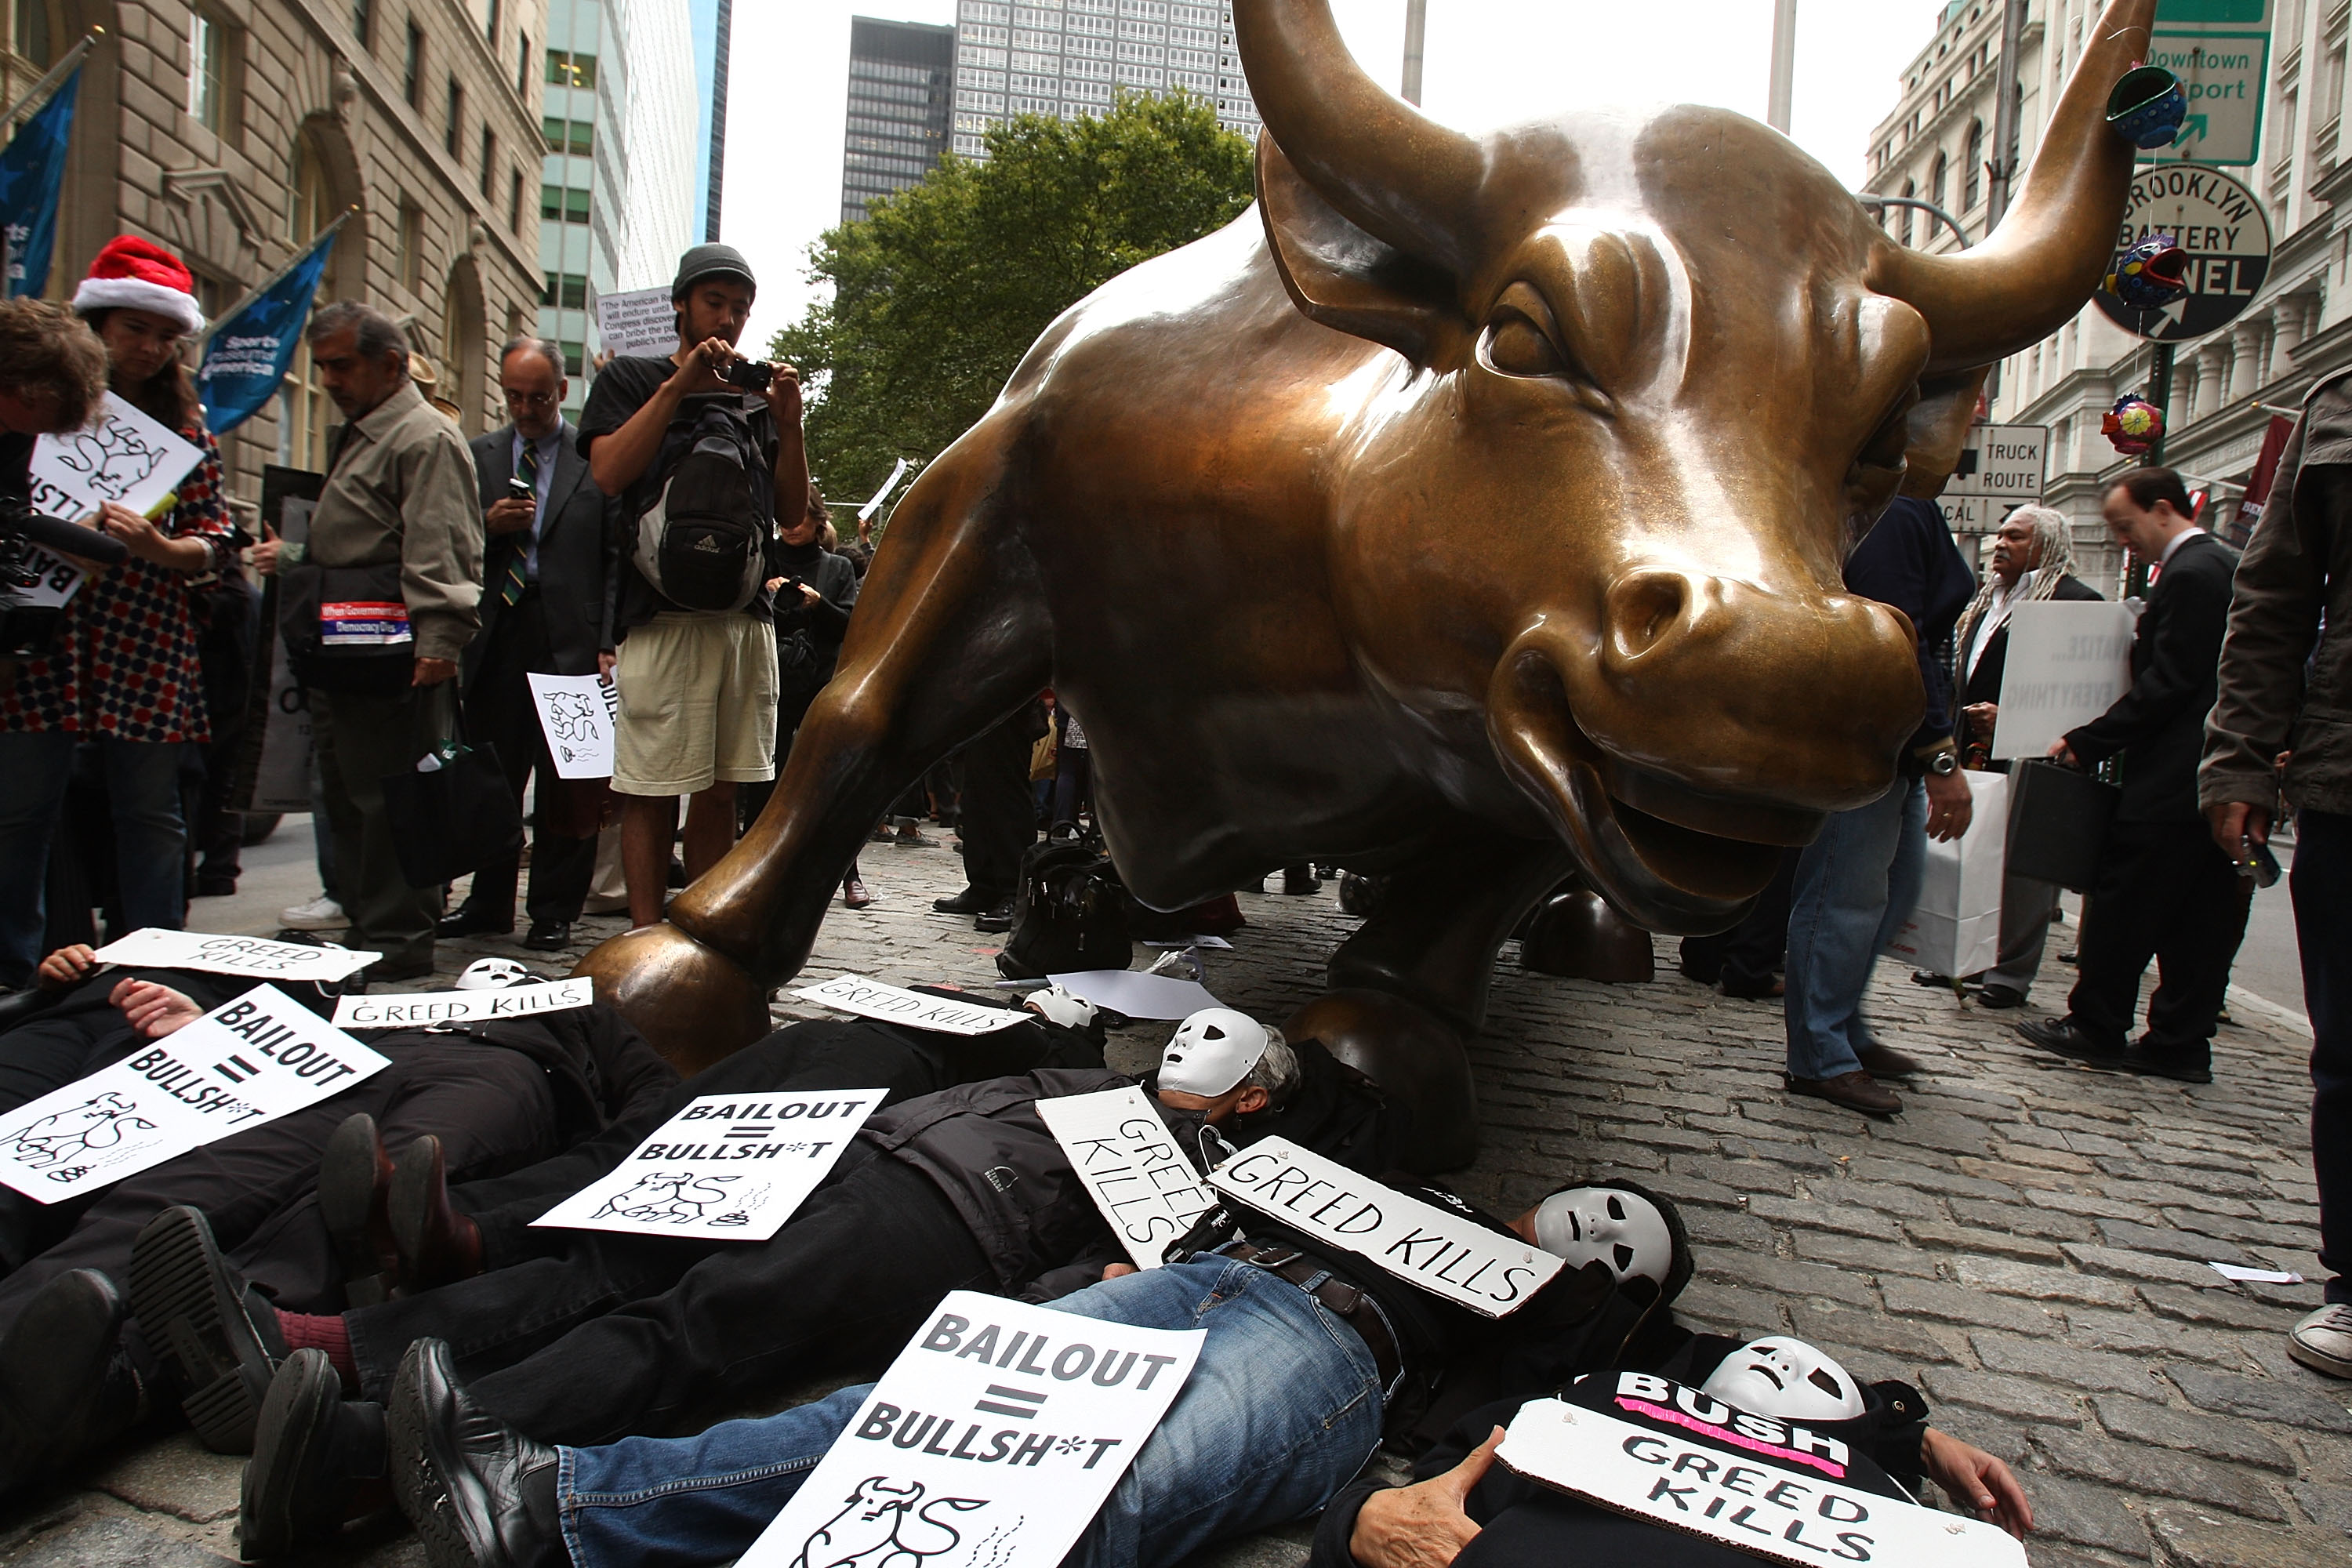 People lay underneath the iconic Wall Street bull during a rally in the financial district in New York City.